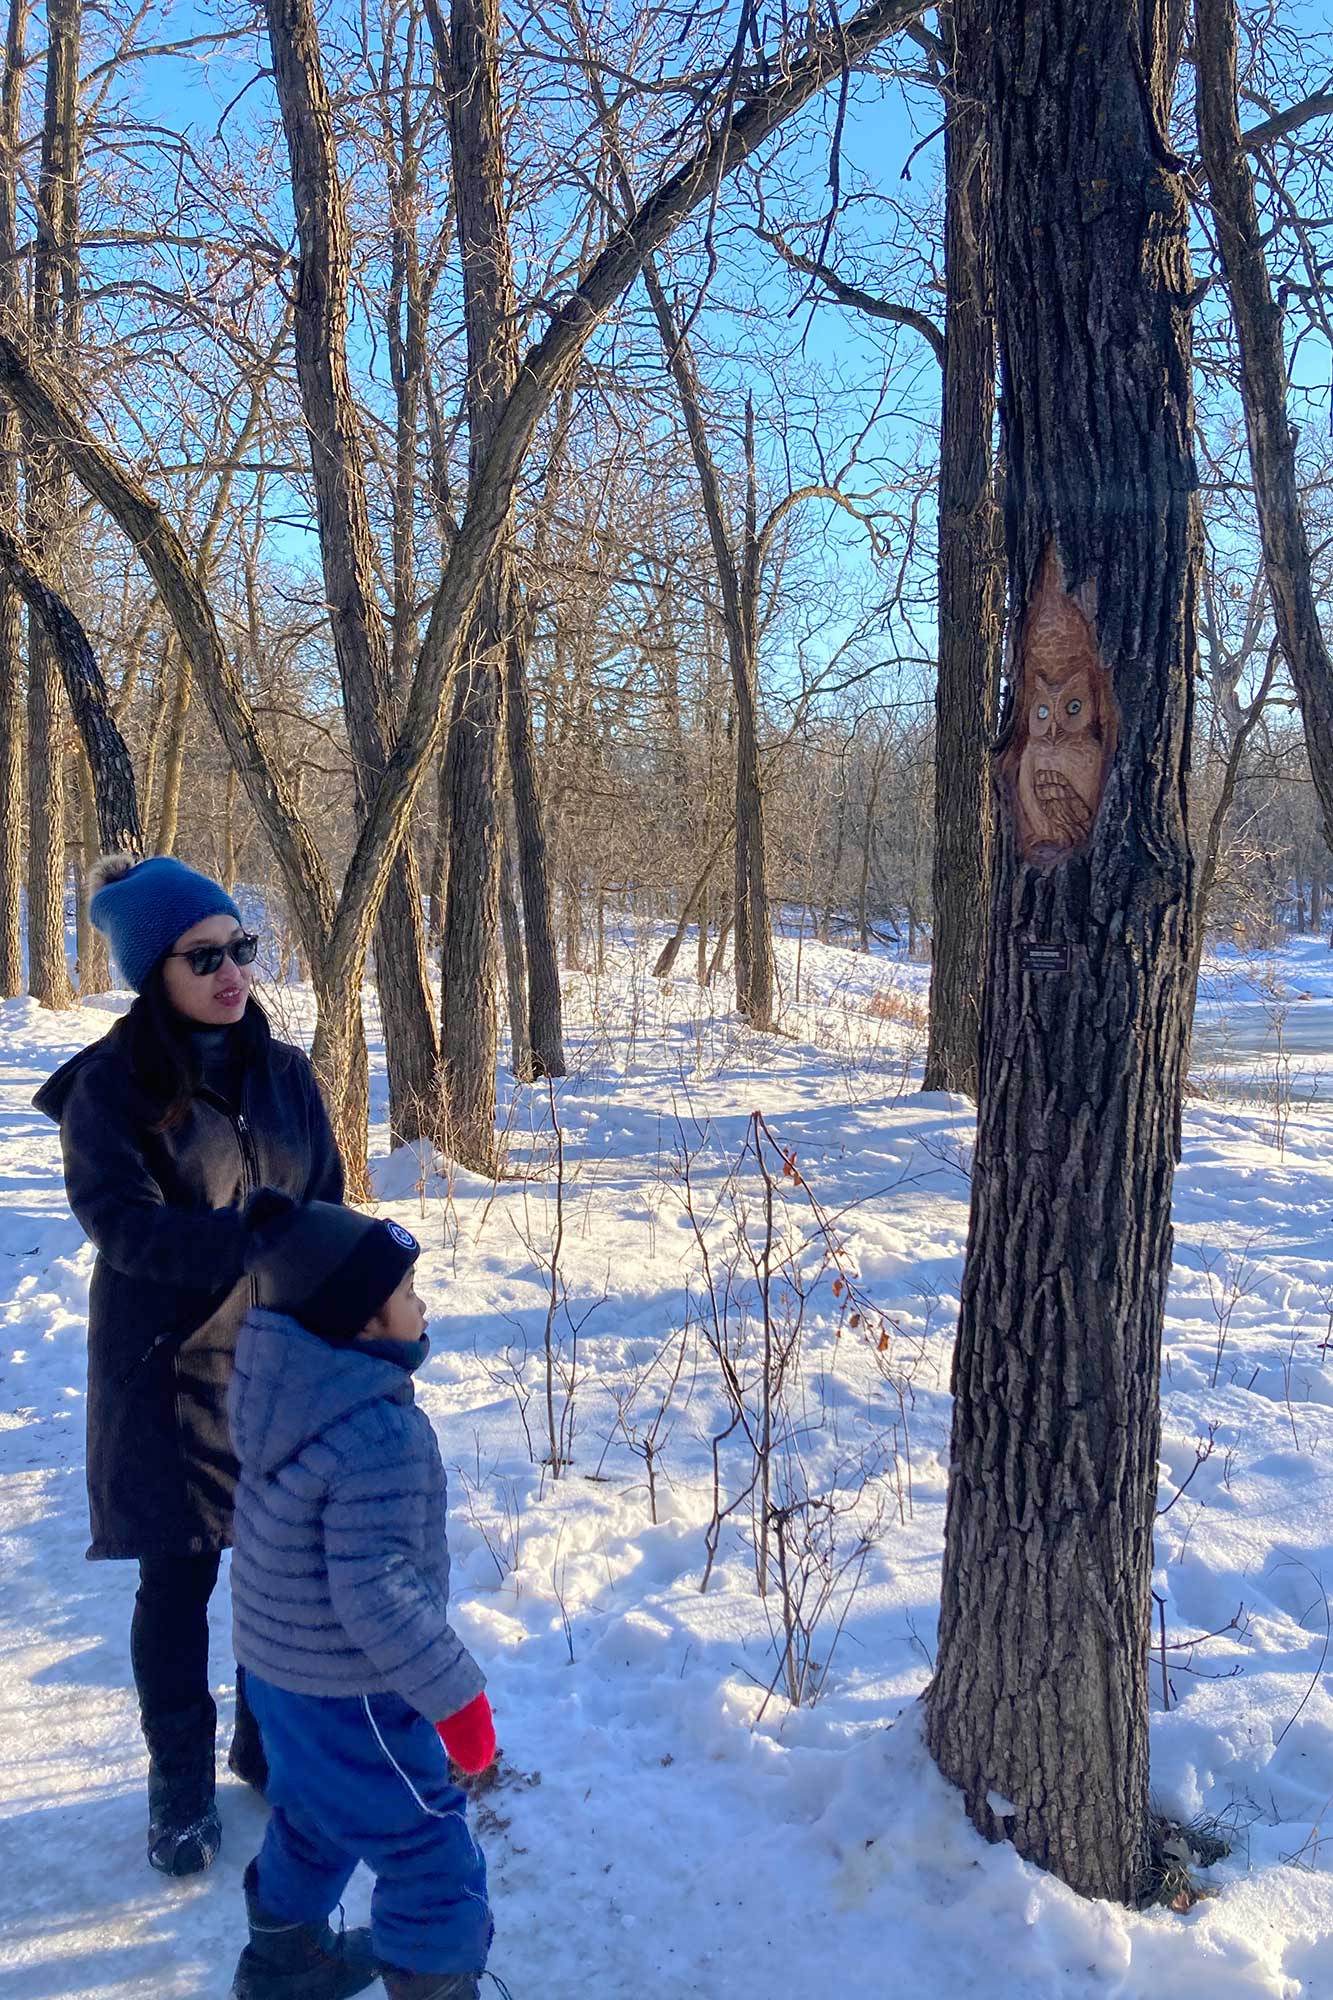 Two people look at a tree carving at Bois-des-Esprits in Winnipeg.